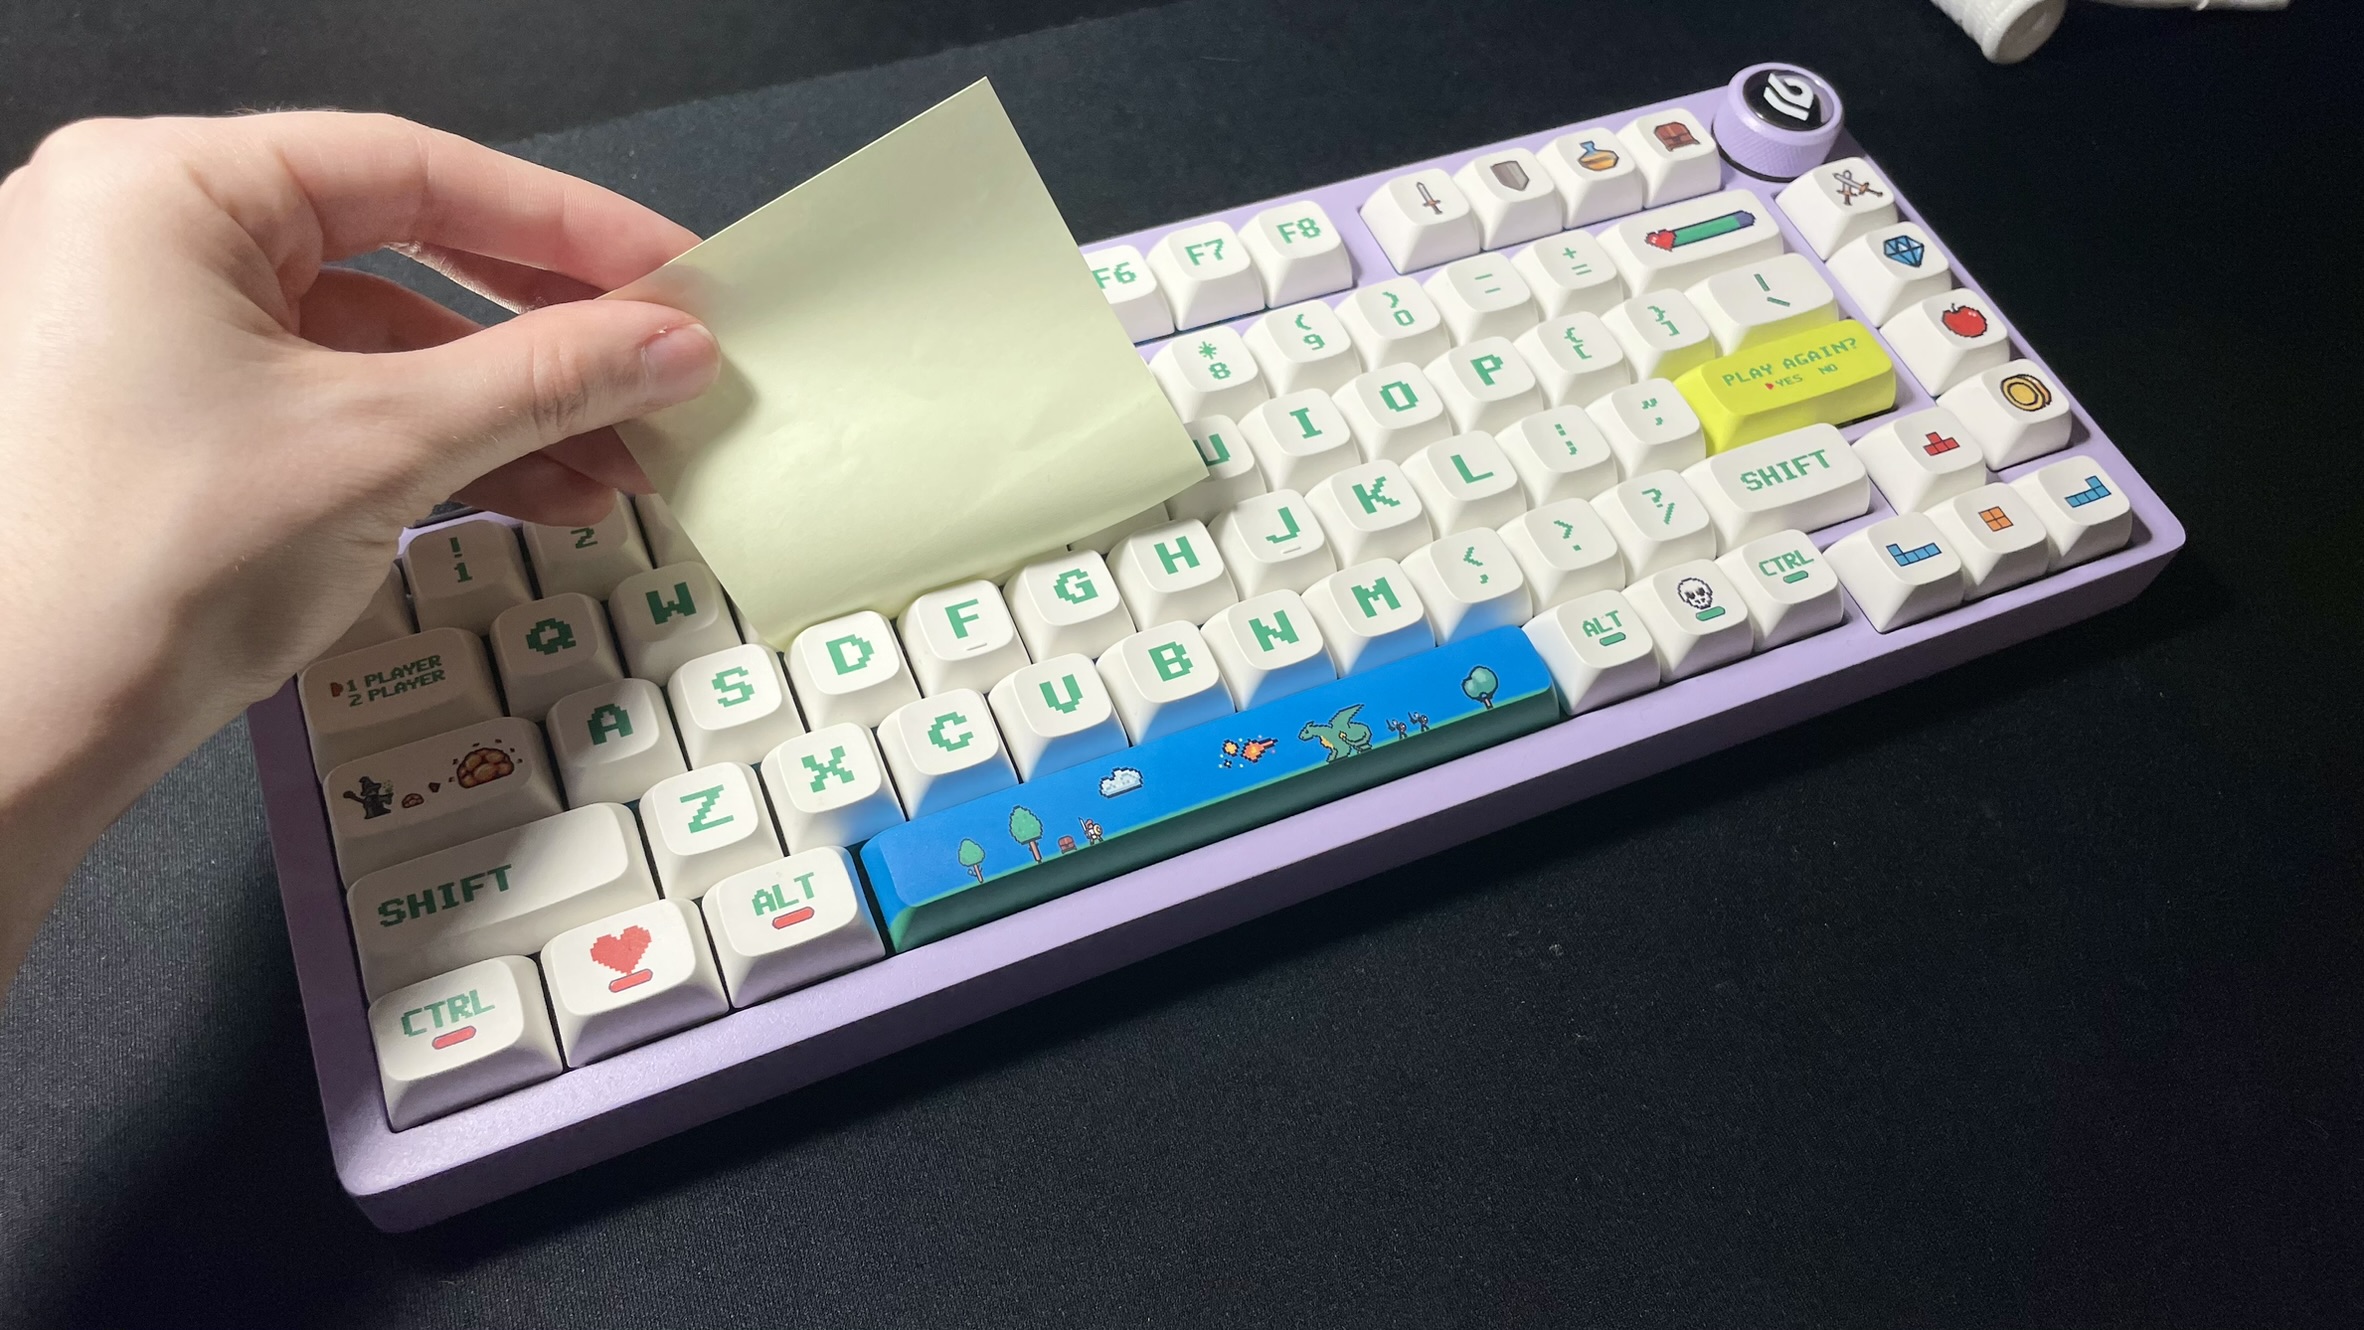 How to clean your keyboard with a sticky note